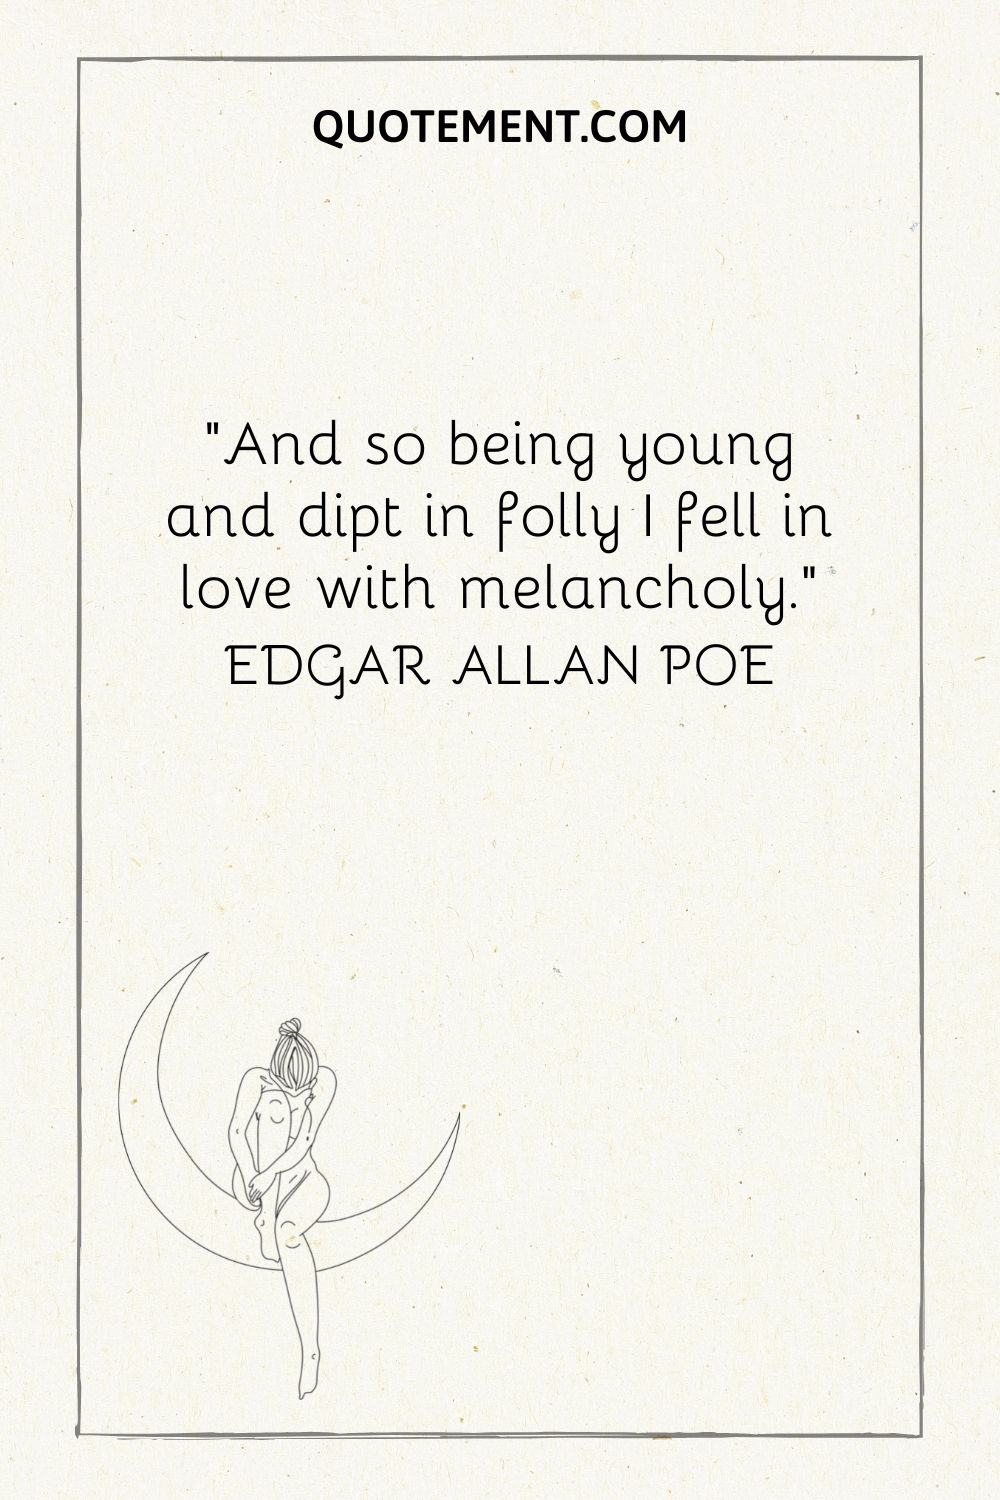 “And so being young and dipt in folly I fell in love with melancholy.” — Edgar Allan Poe